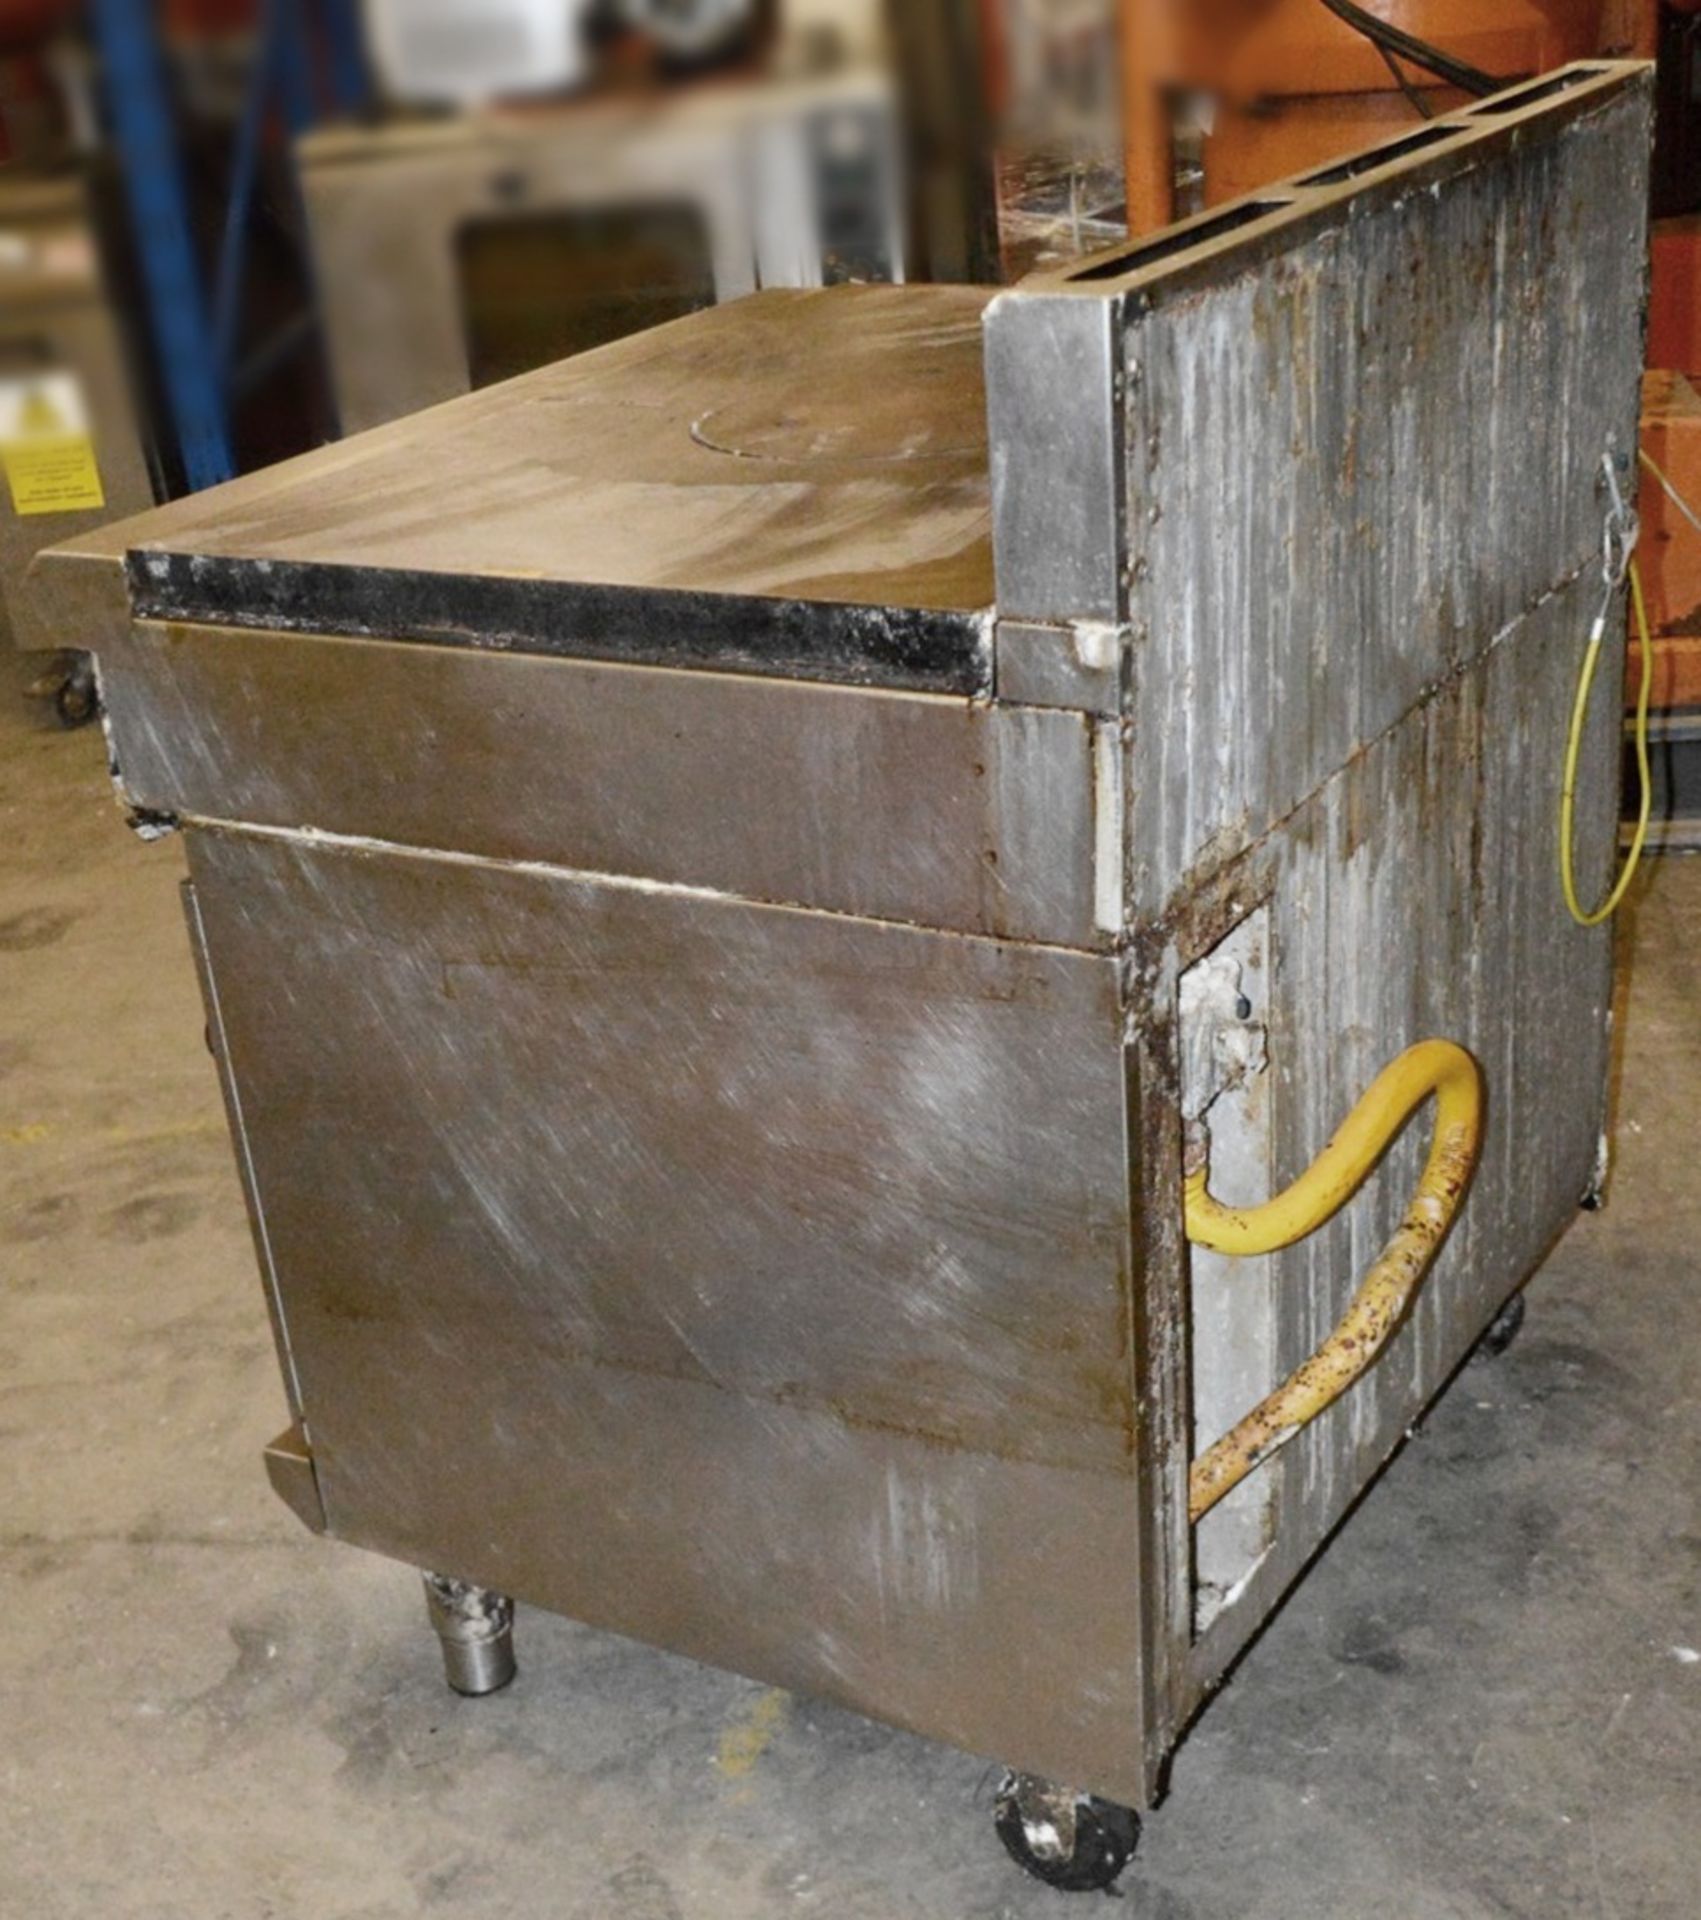 1 x Commercial Natural Gas Solid Top Range In Stainless Steel - Ref: J1566 - Low Start, No Reserve - Image 4 of 5